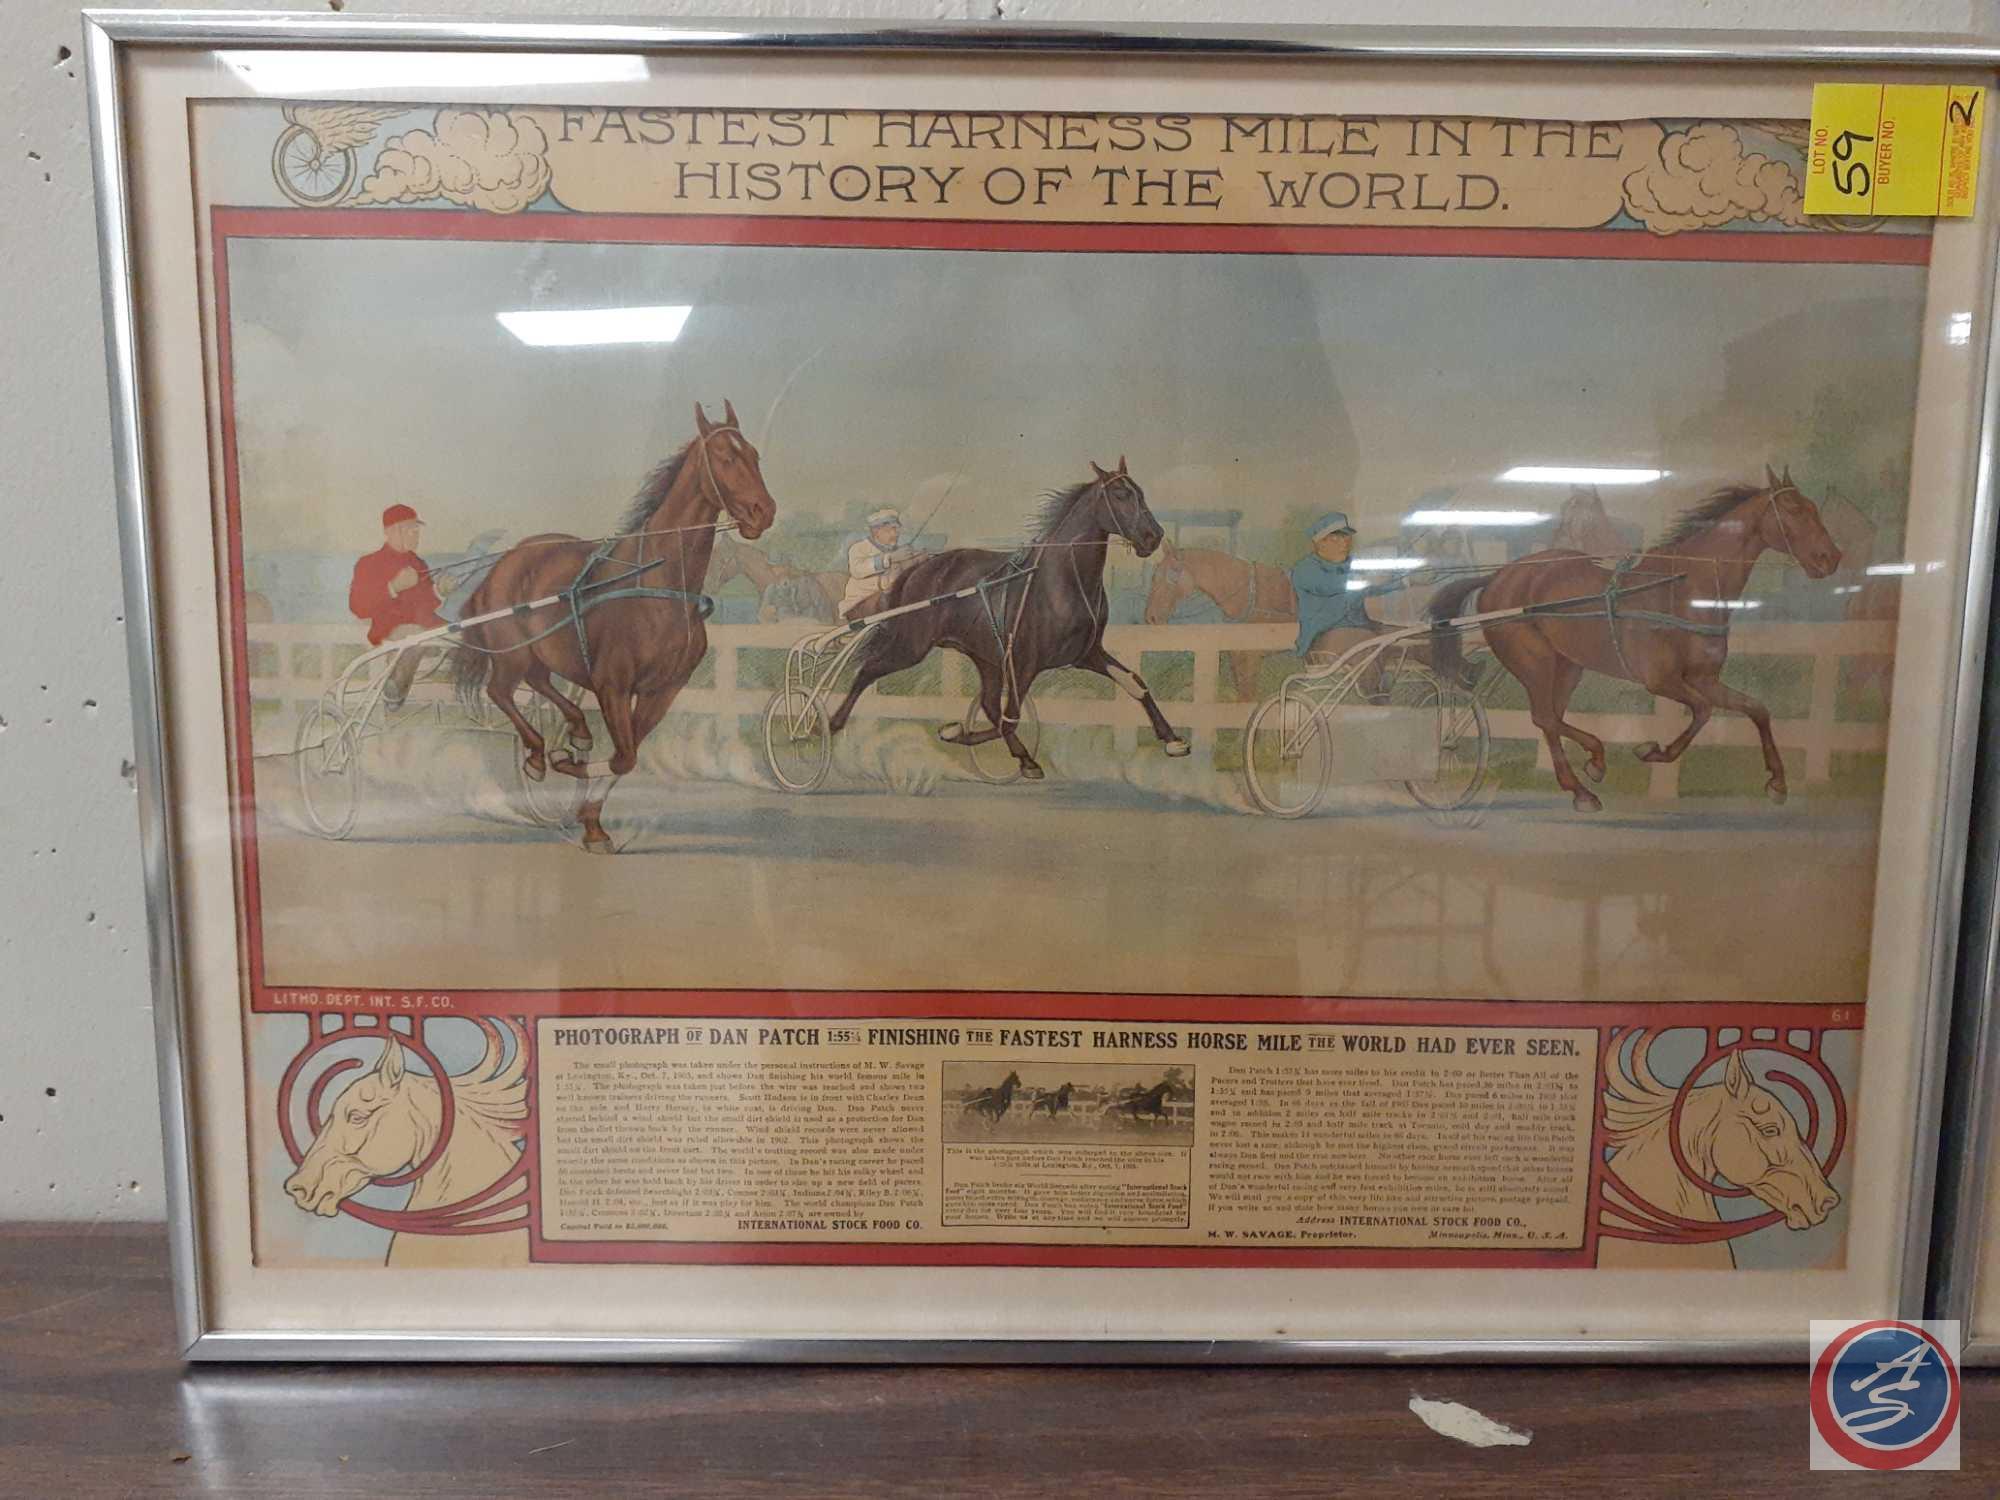 Fastest Harness Mile in the History of the World Framed Poster Measuring 22'' X 16'' and Dan Patch